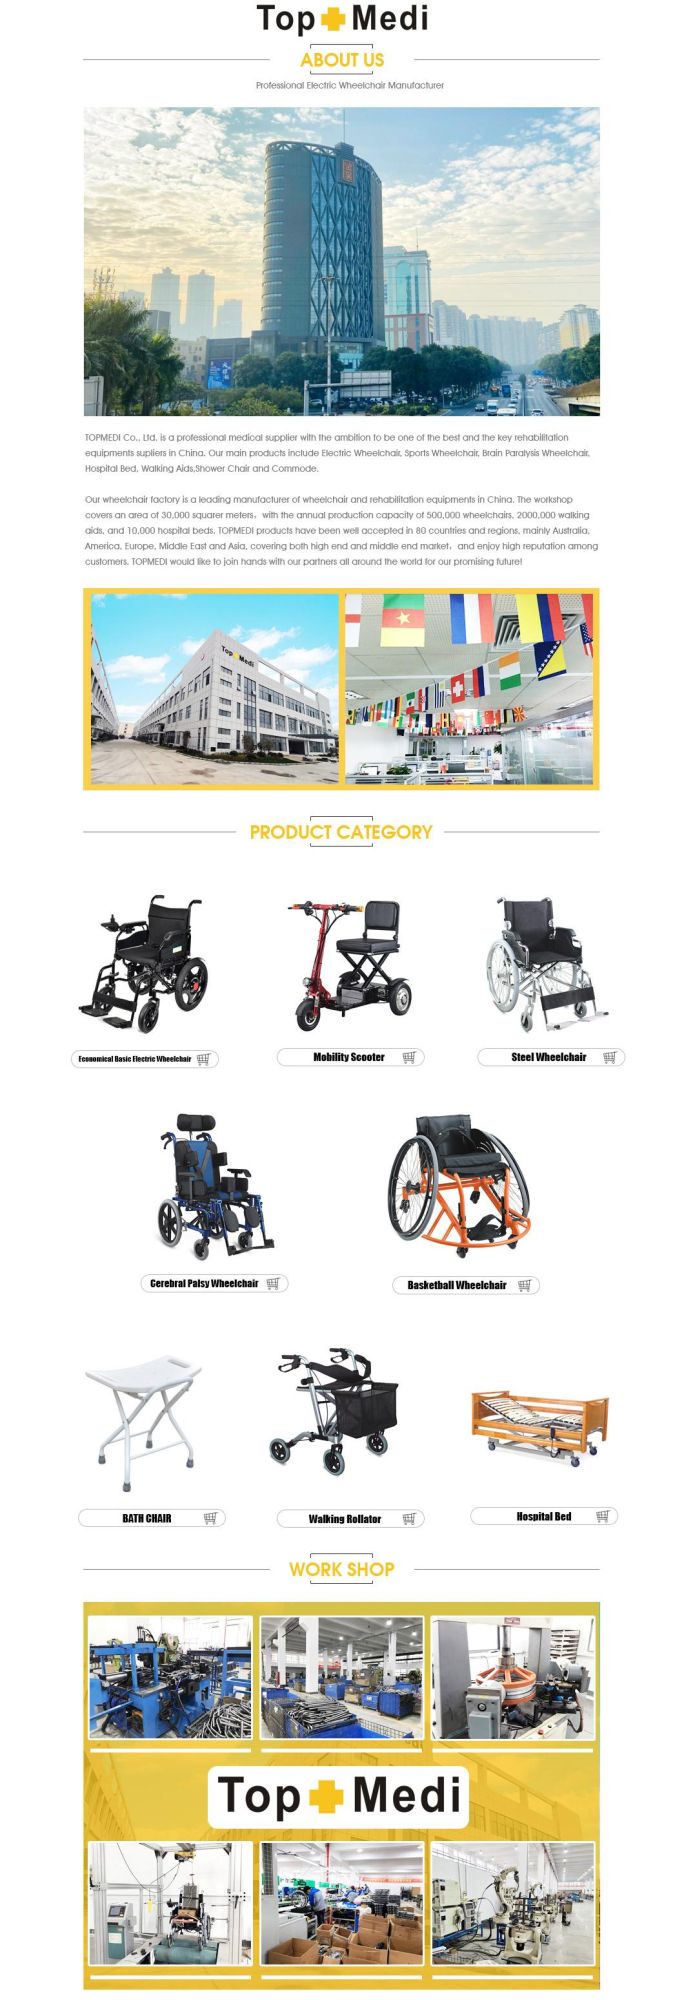 CE Approved Elderly Bath Toilet Wheelchair Wheel Portable Seat Medical Equipment Commode Chair New